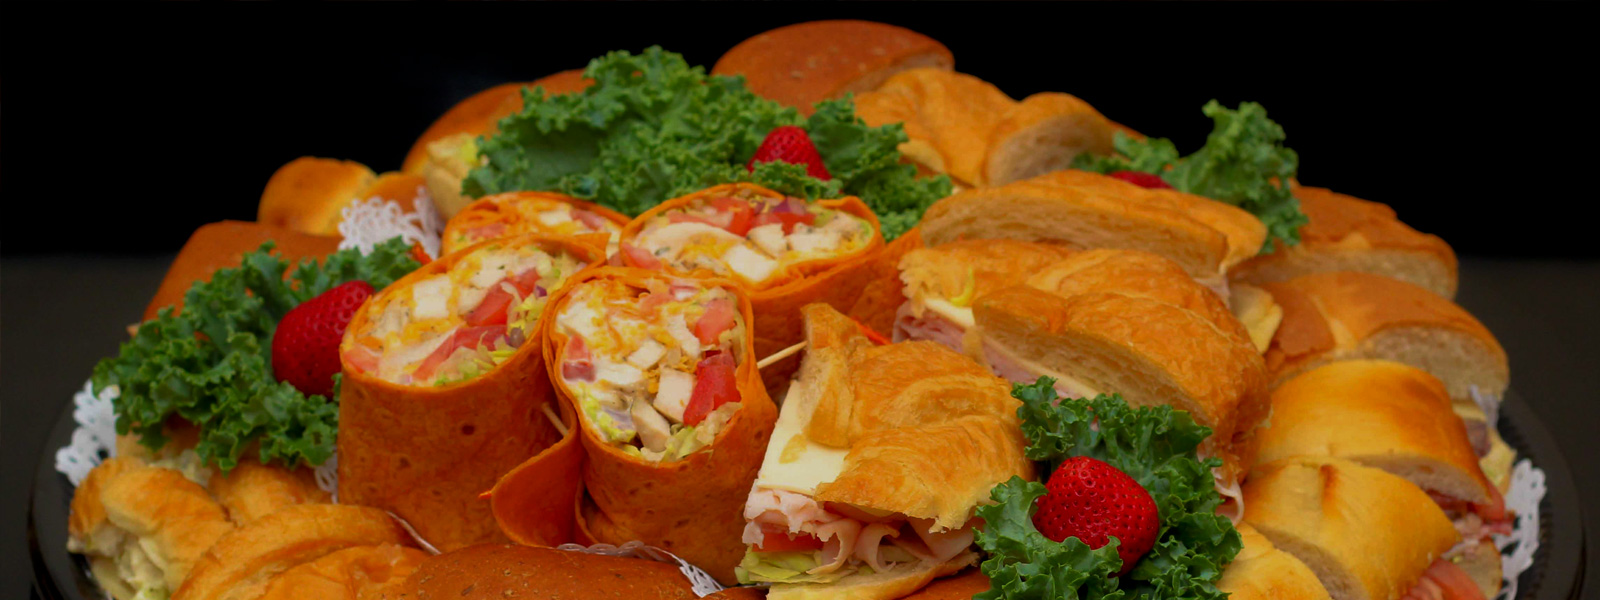 Tray-Full-Of-Sandwiches